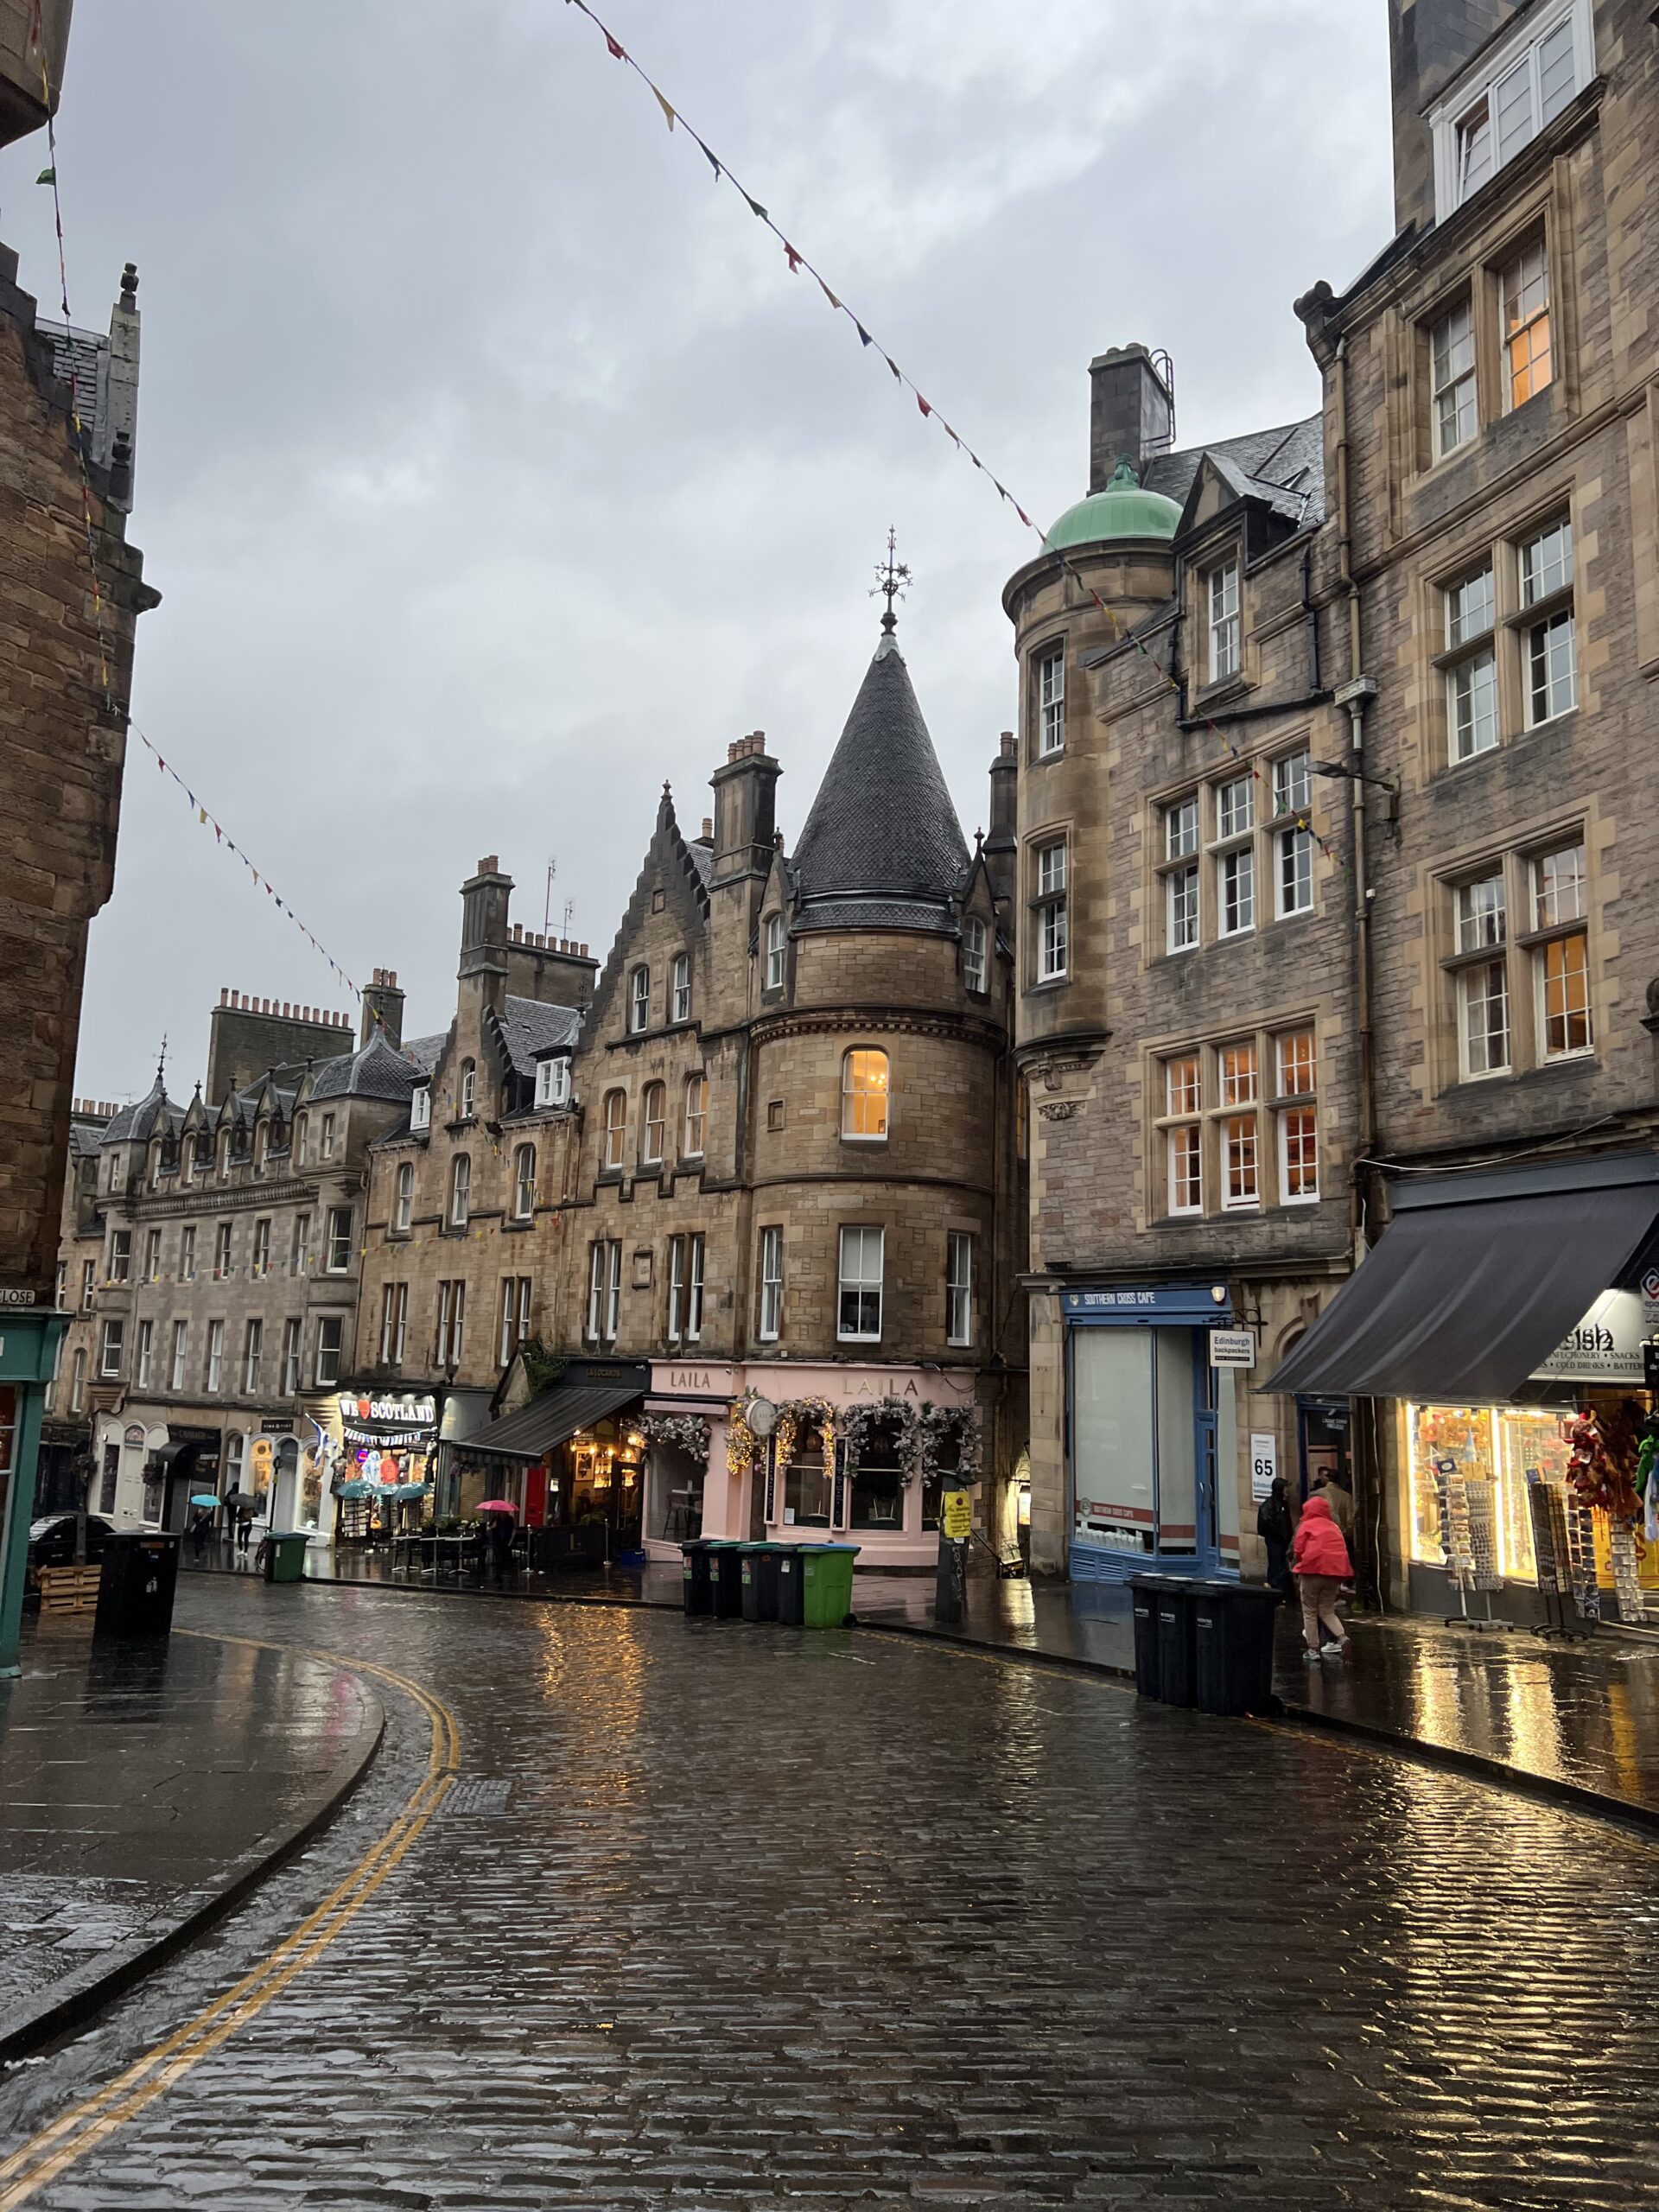 a photo of a wet street in Edinburgh Scotland where people are walking along the street in front of shops and restaurants 